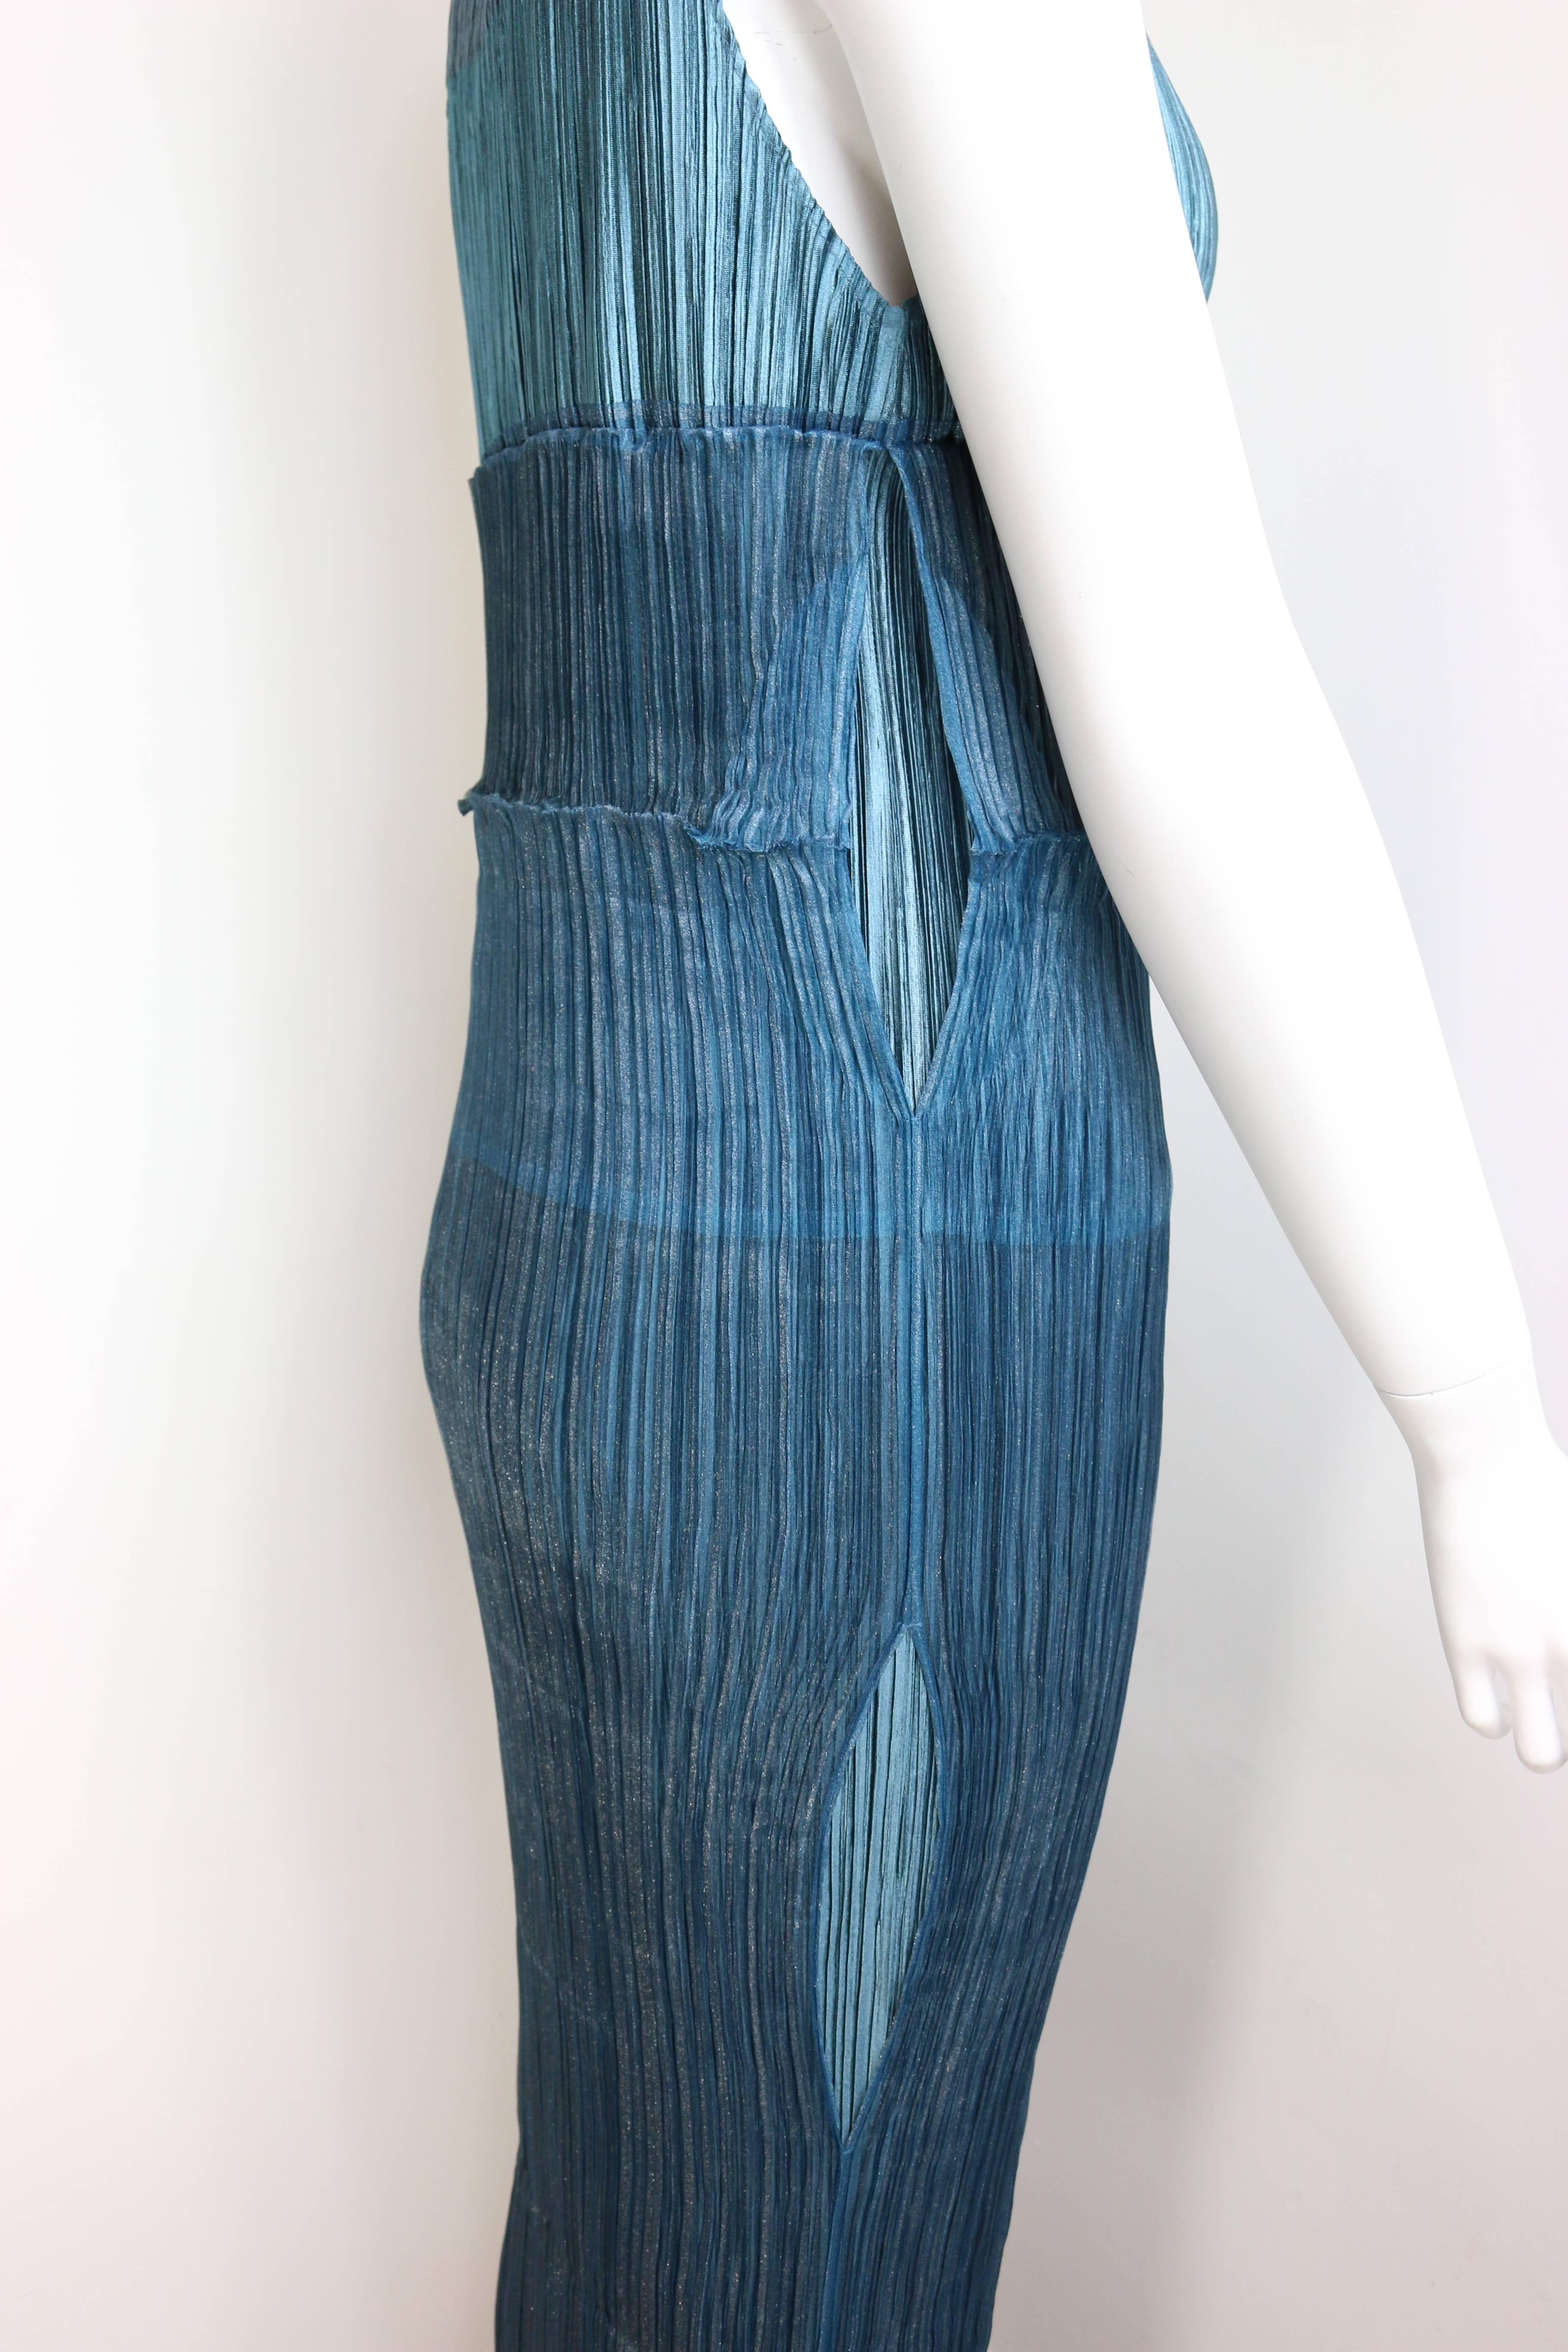 - Brand new 90s Issey Miyake two layers blue pleated maxi dress. Never worn before with original tag. 

- Height: 143cm I Bust: 40cm I Waist: 70cm. 

- Made in Japan. 

- Size M. 

- 100% Polyester. 

